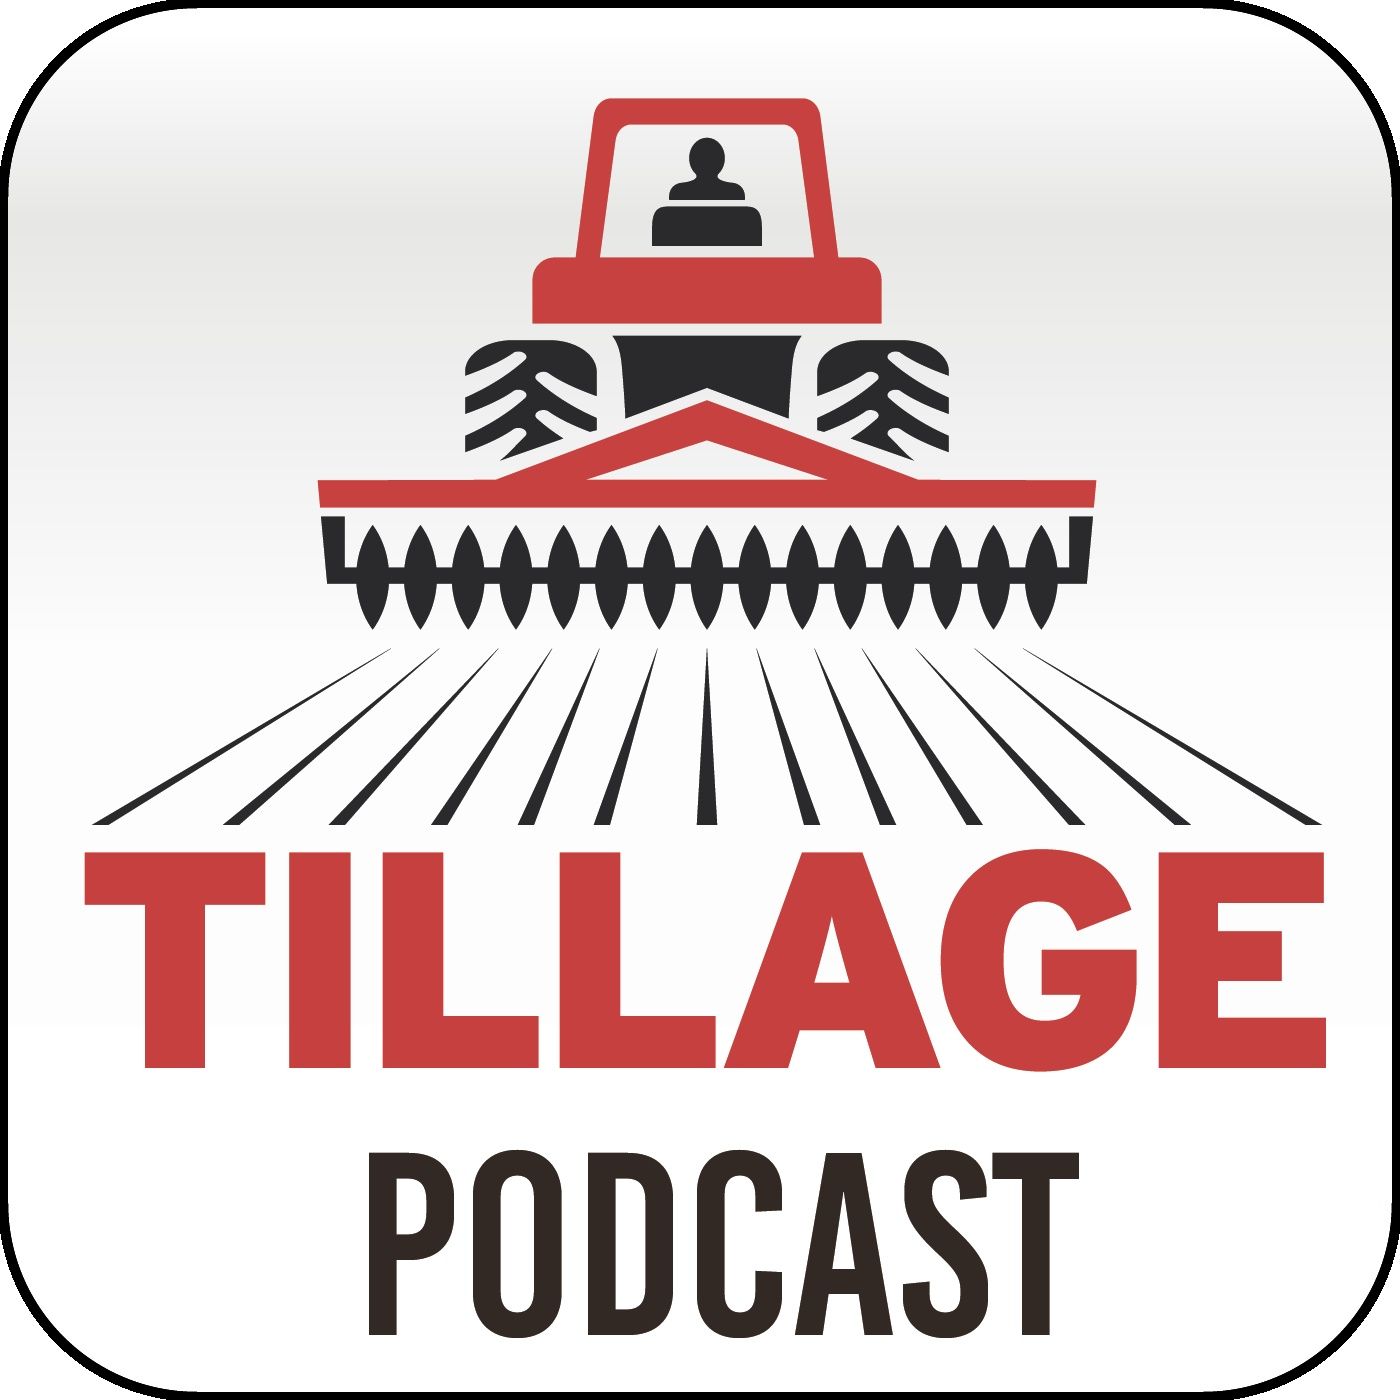 Ep 975: The Tillage Podcast - 3 crops, rules, rain and some positivity